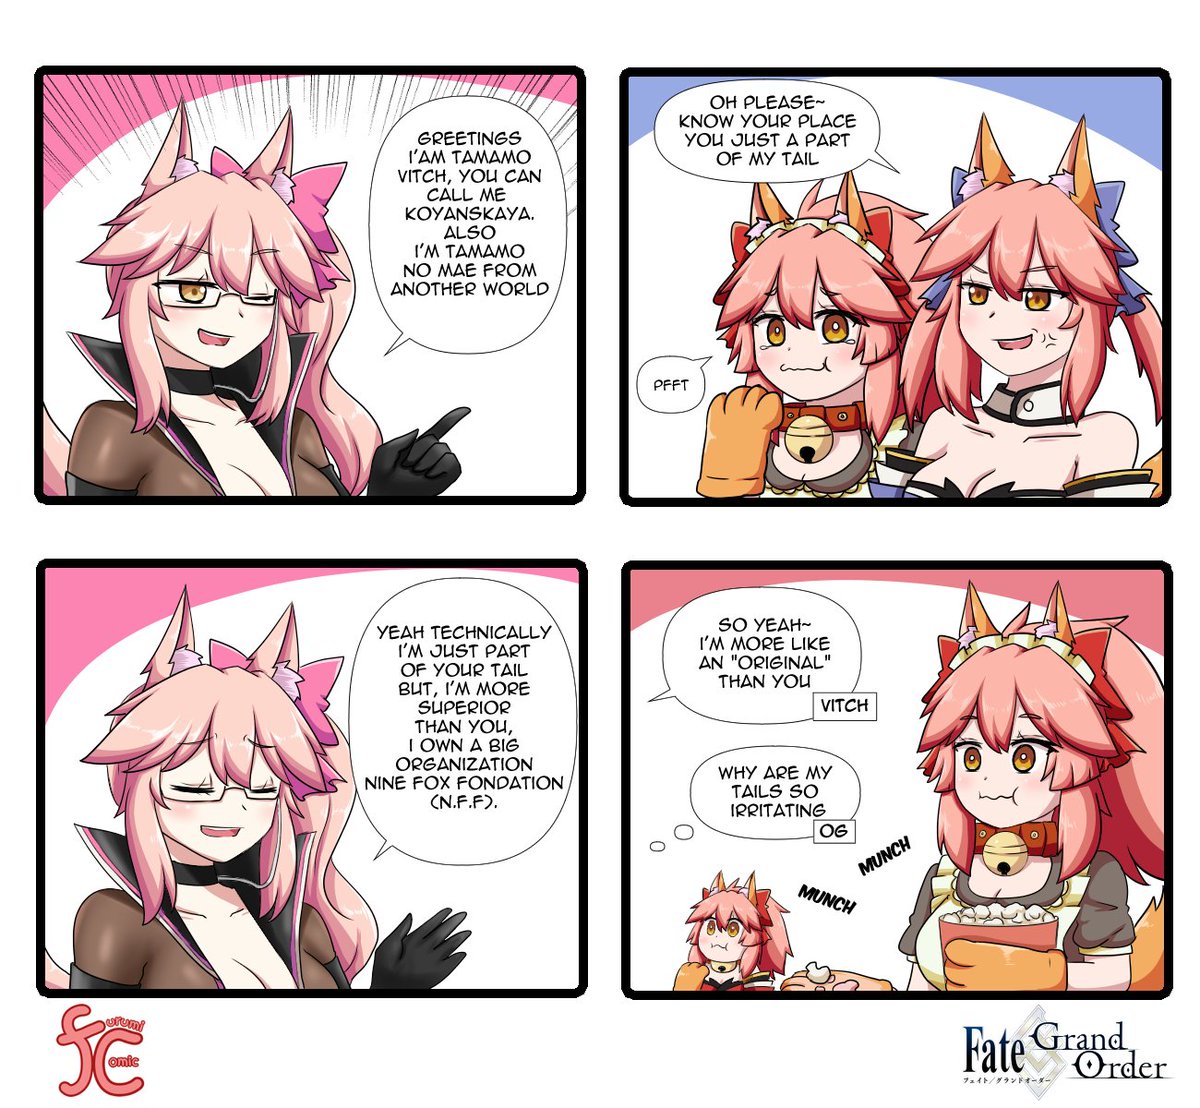 A Superior Tail
Sorry for the Typo on "Foundation"
#FGO #FateGO #タマモキャット 